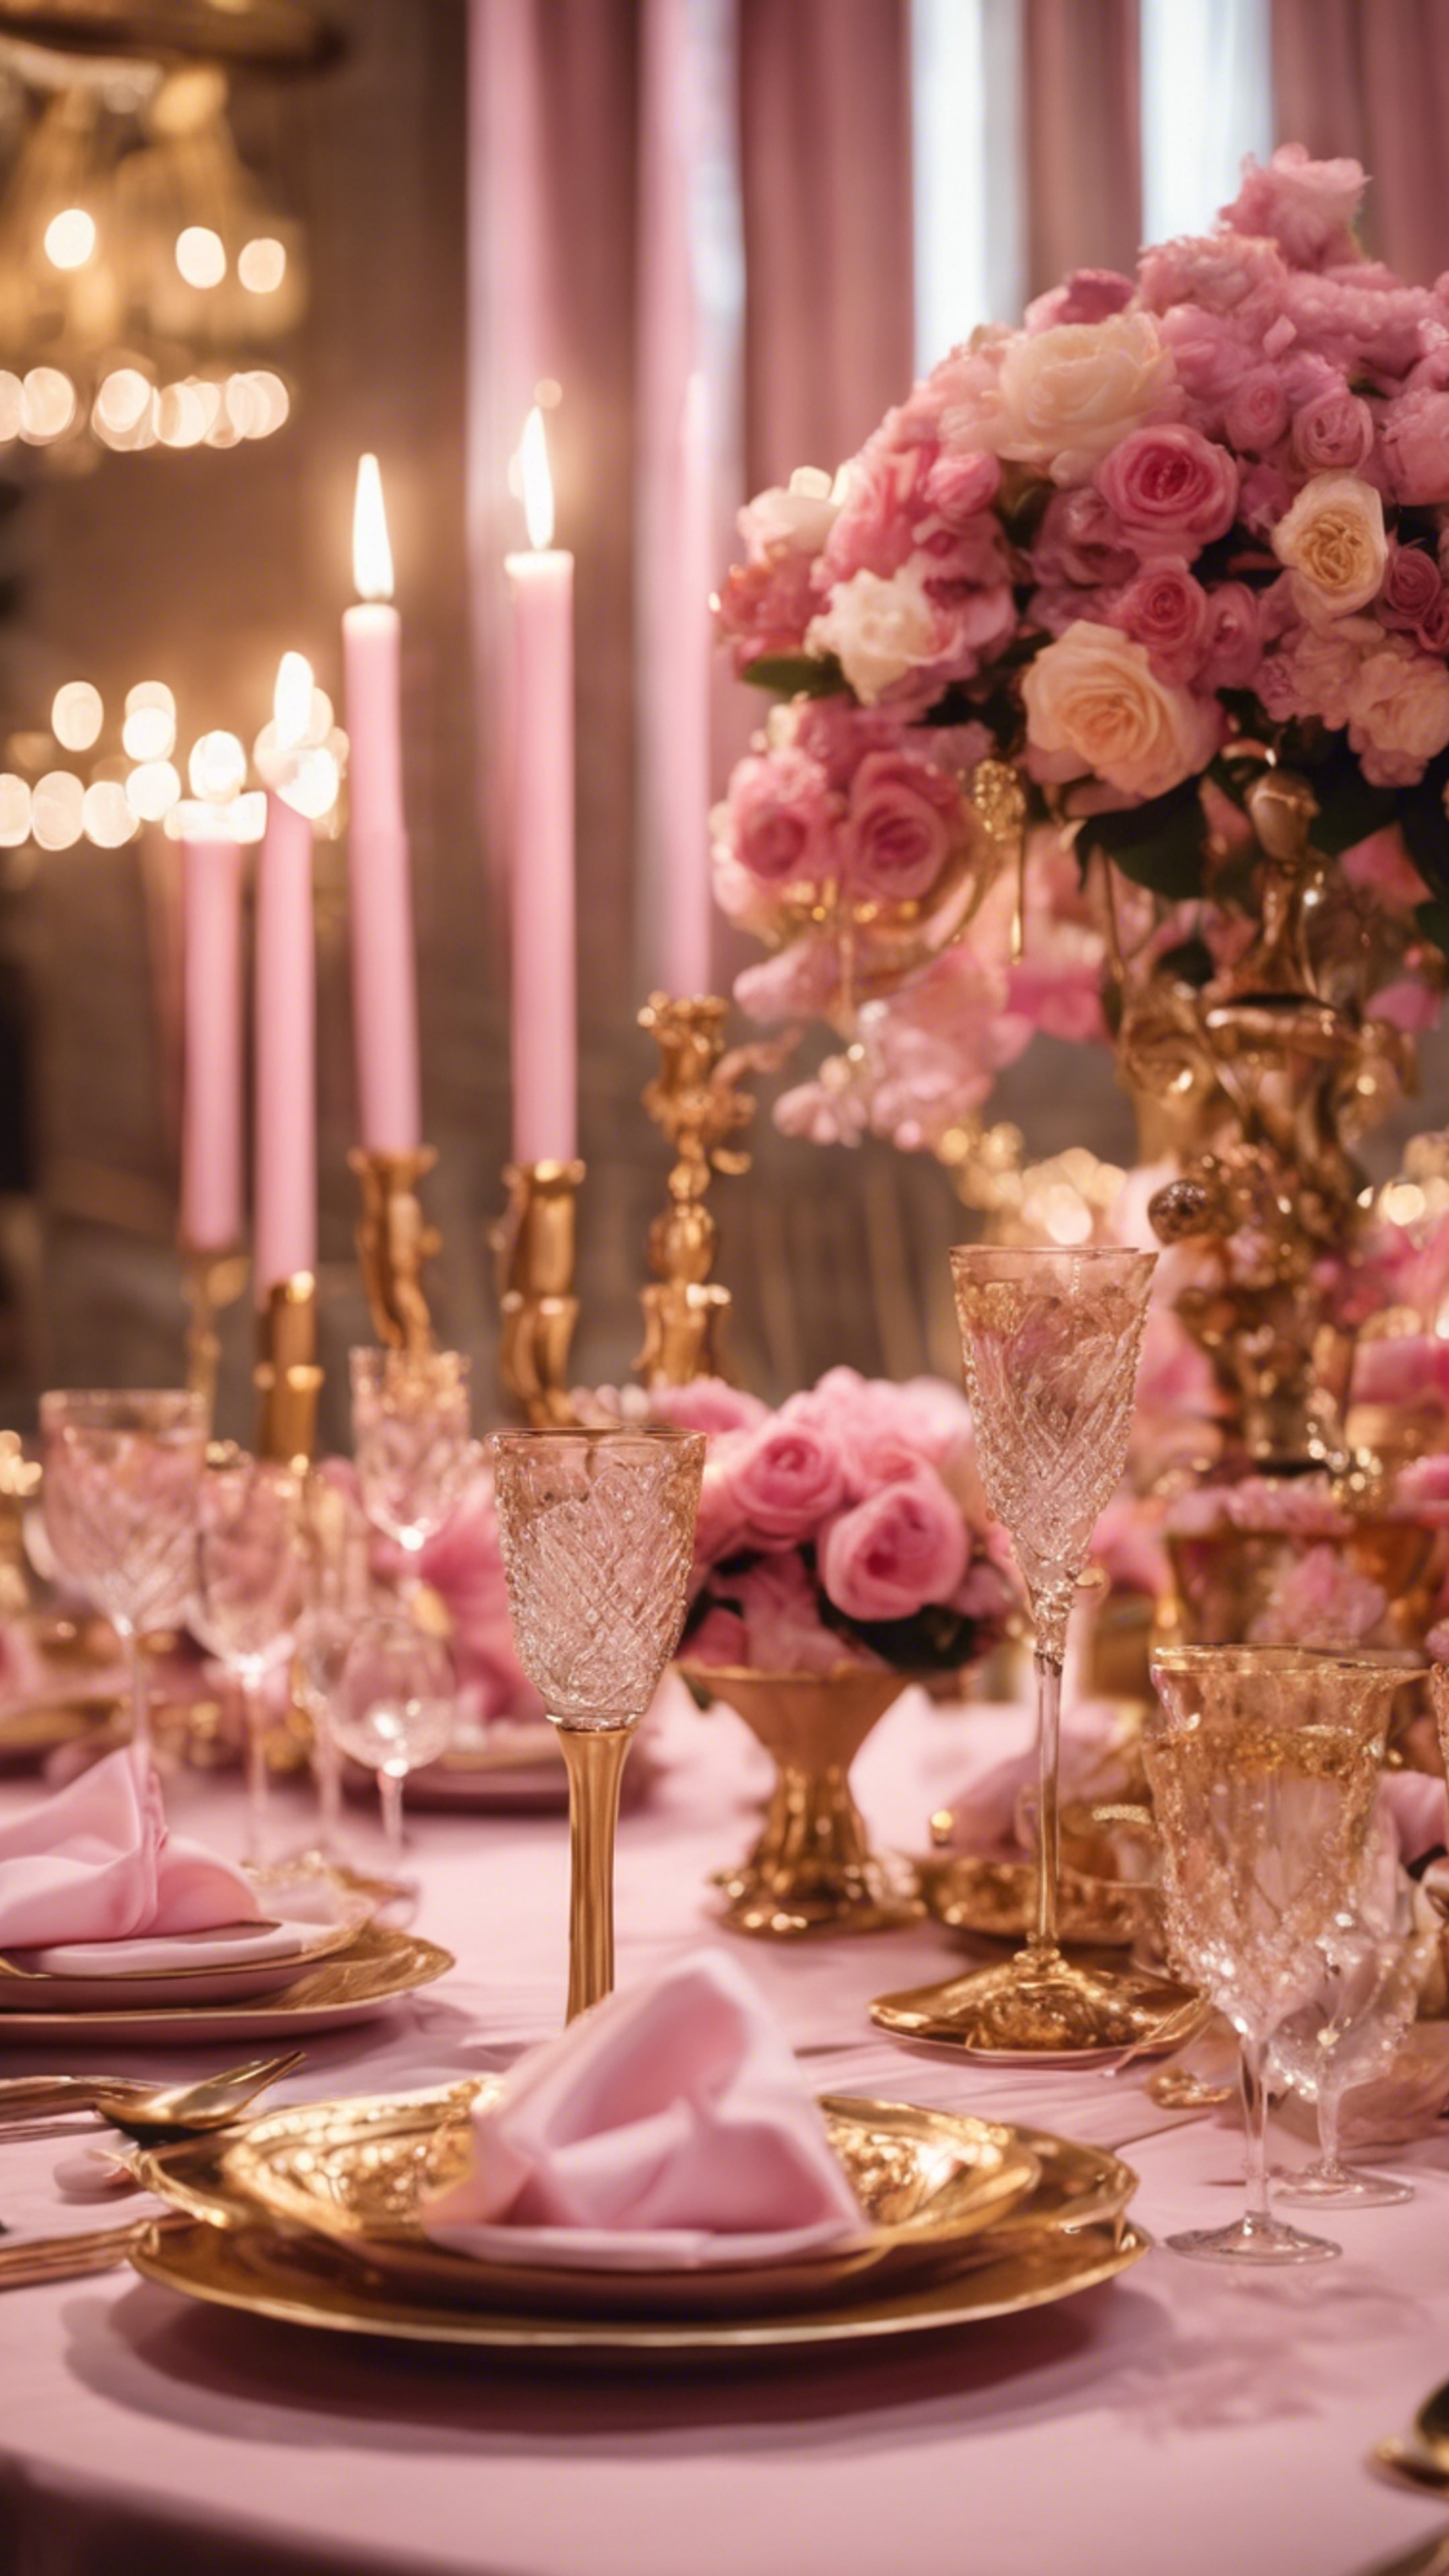 An elegant pink and gold-themed dining table set for an evening soiree. ورق الجدران[a96f4c3be44f41948a30]